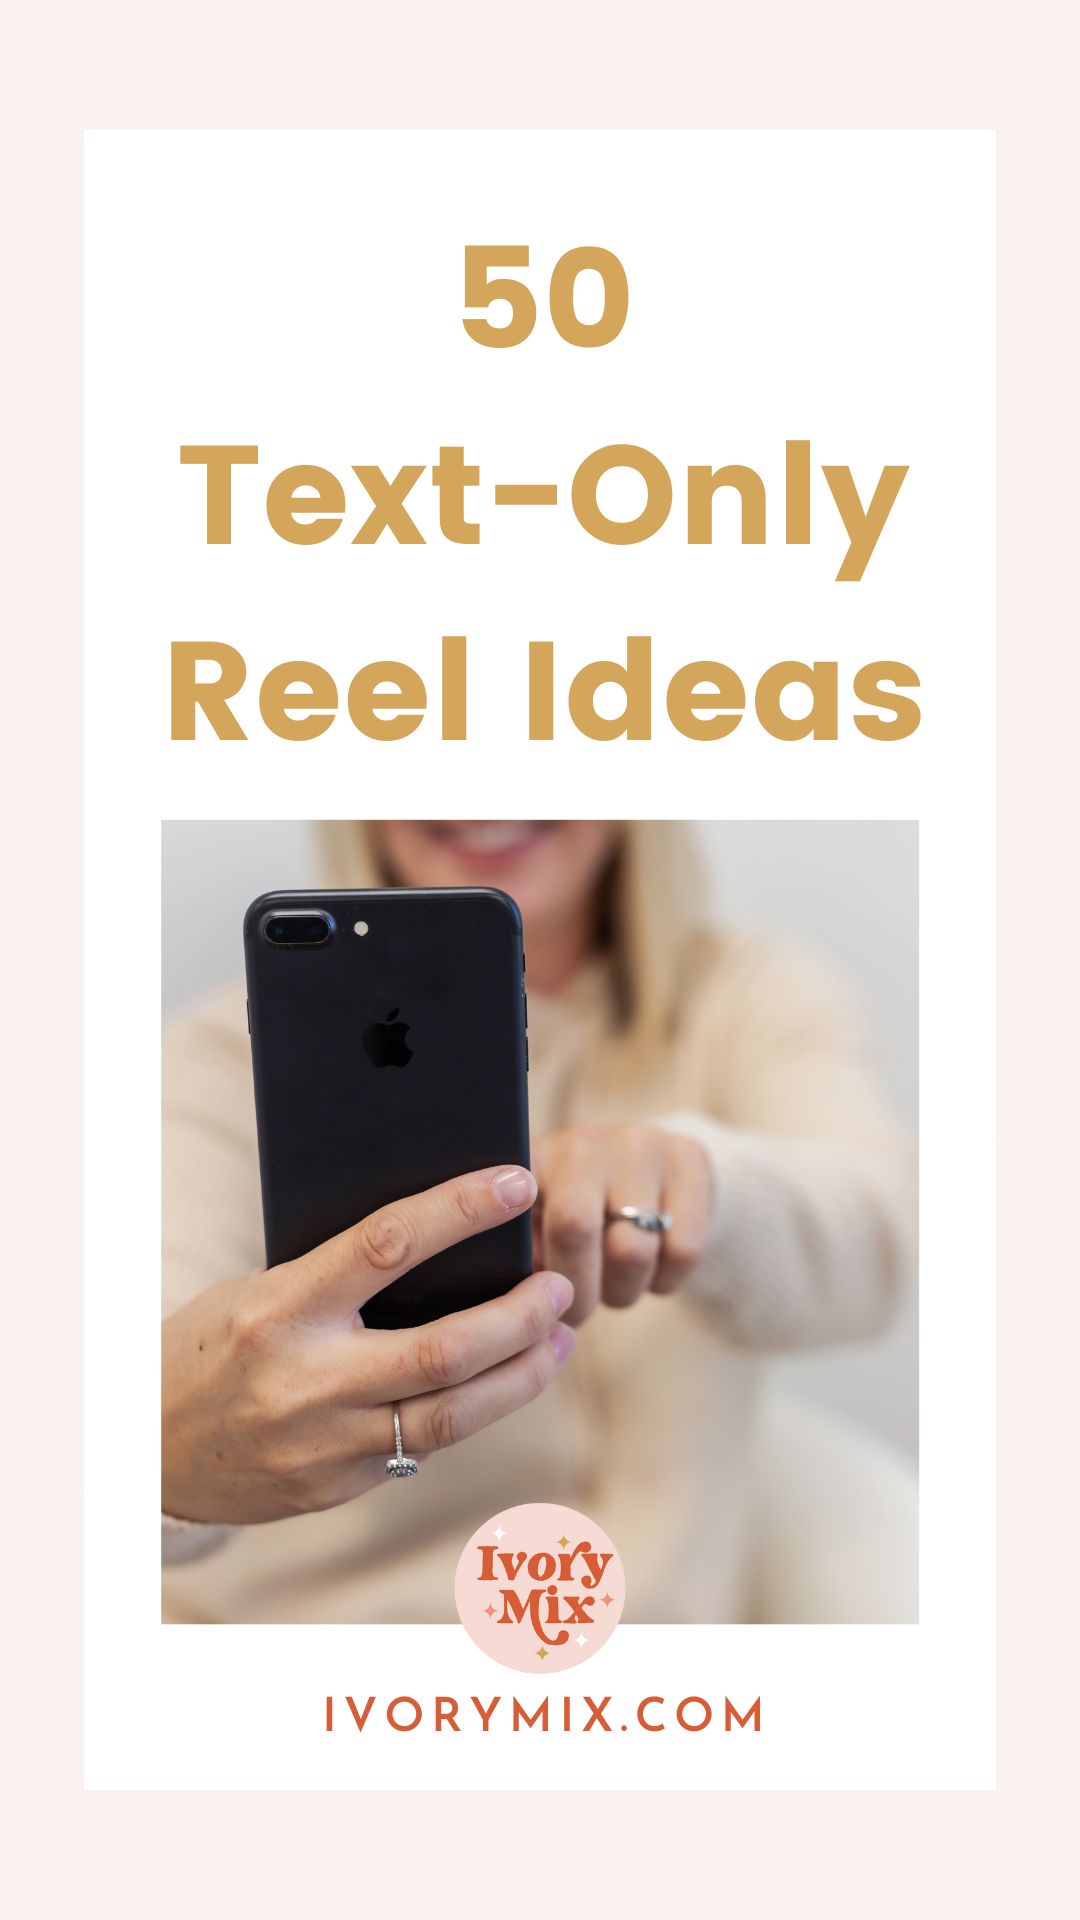 50 text-only reel ideas